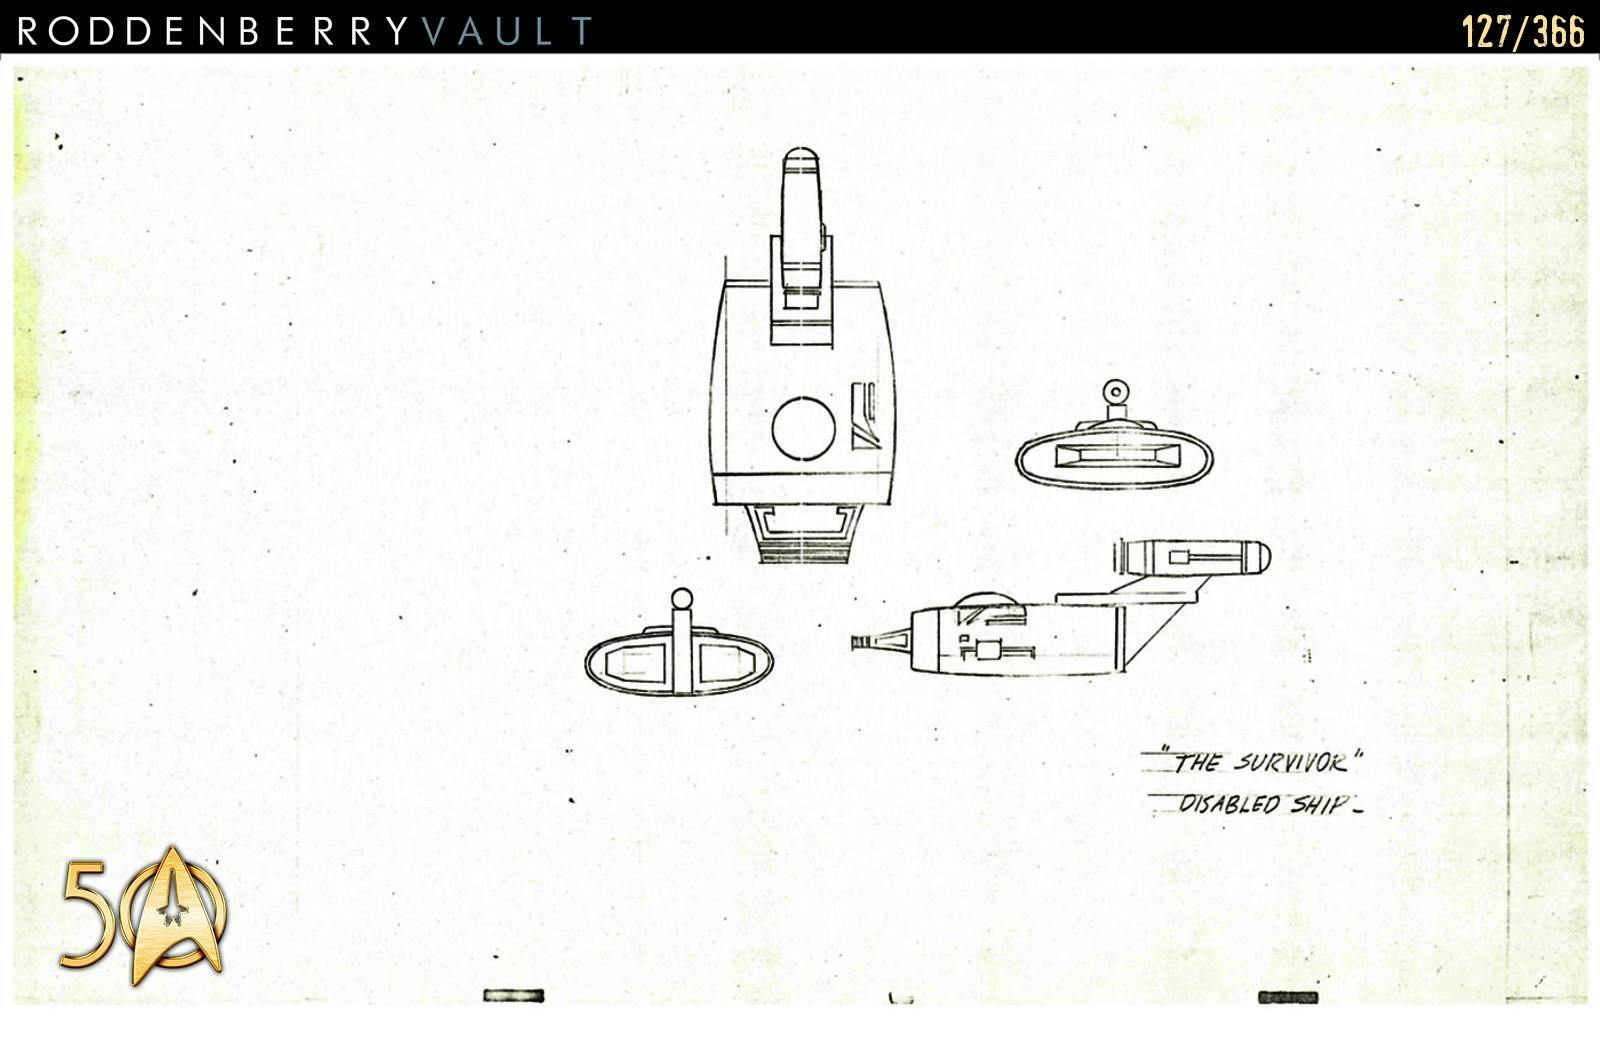 From the Roddenberry 366 Vault - The Animated Series - disabled ship concept from 'The Survivor'